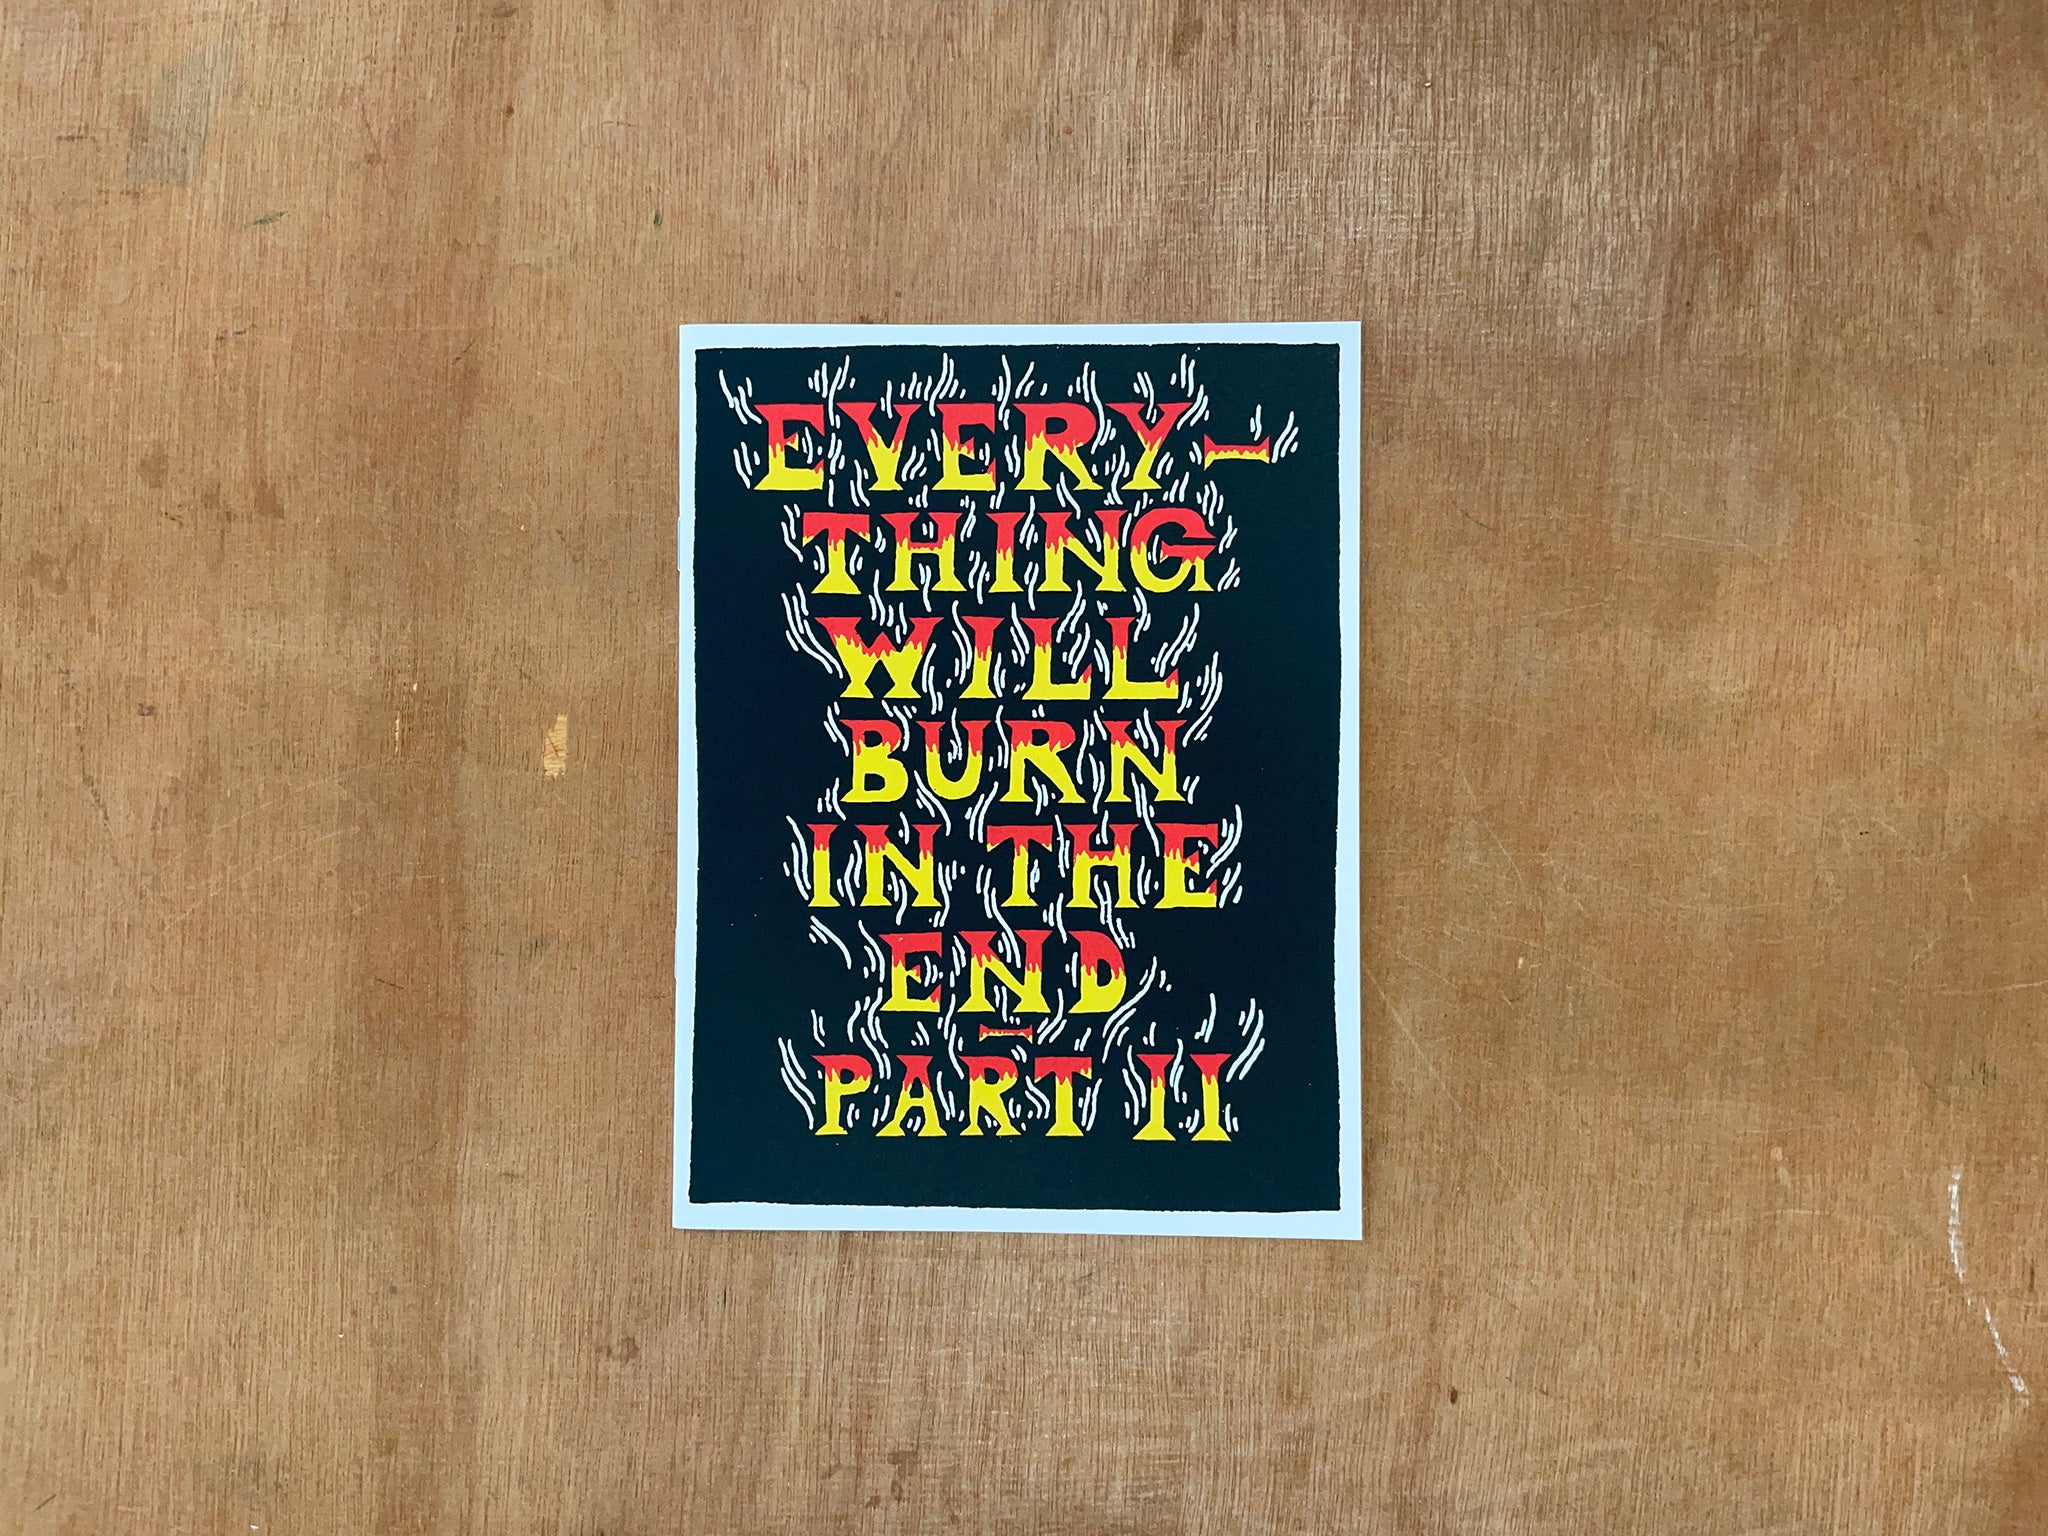 EVERYTHING WILL BURN IN THE END - PT. 2 by Dario Forlin